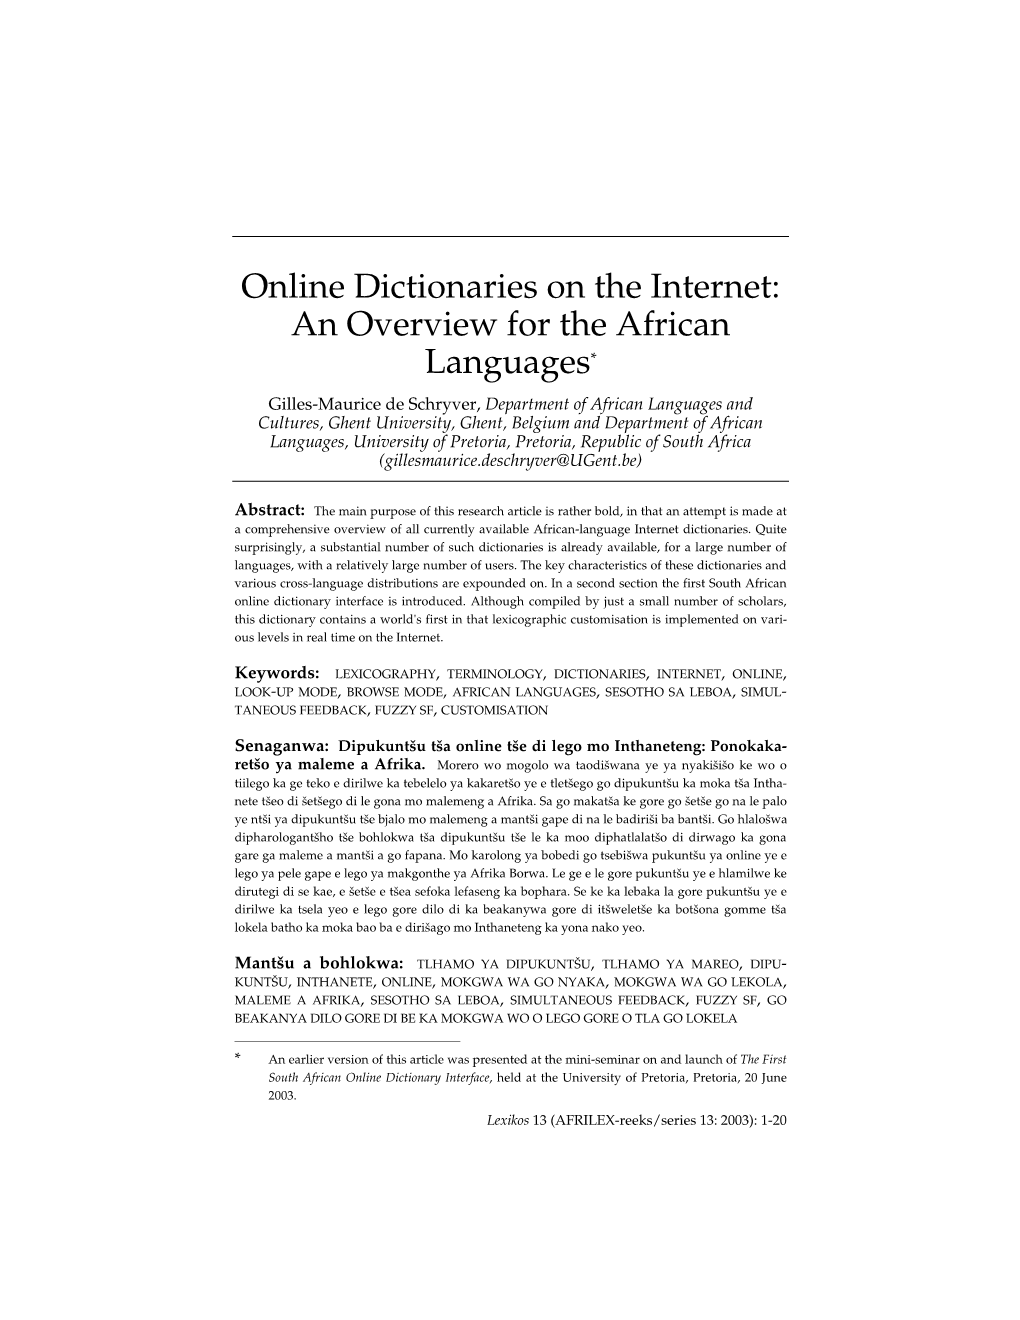 Online Dictionaries on the Internet: an Overview for the African Languages